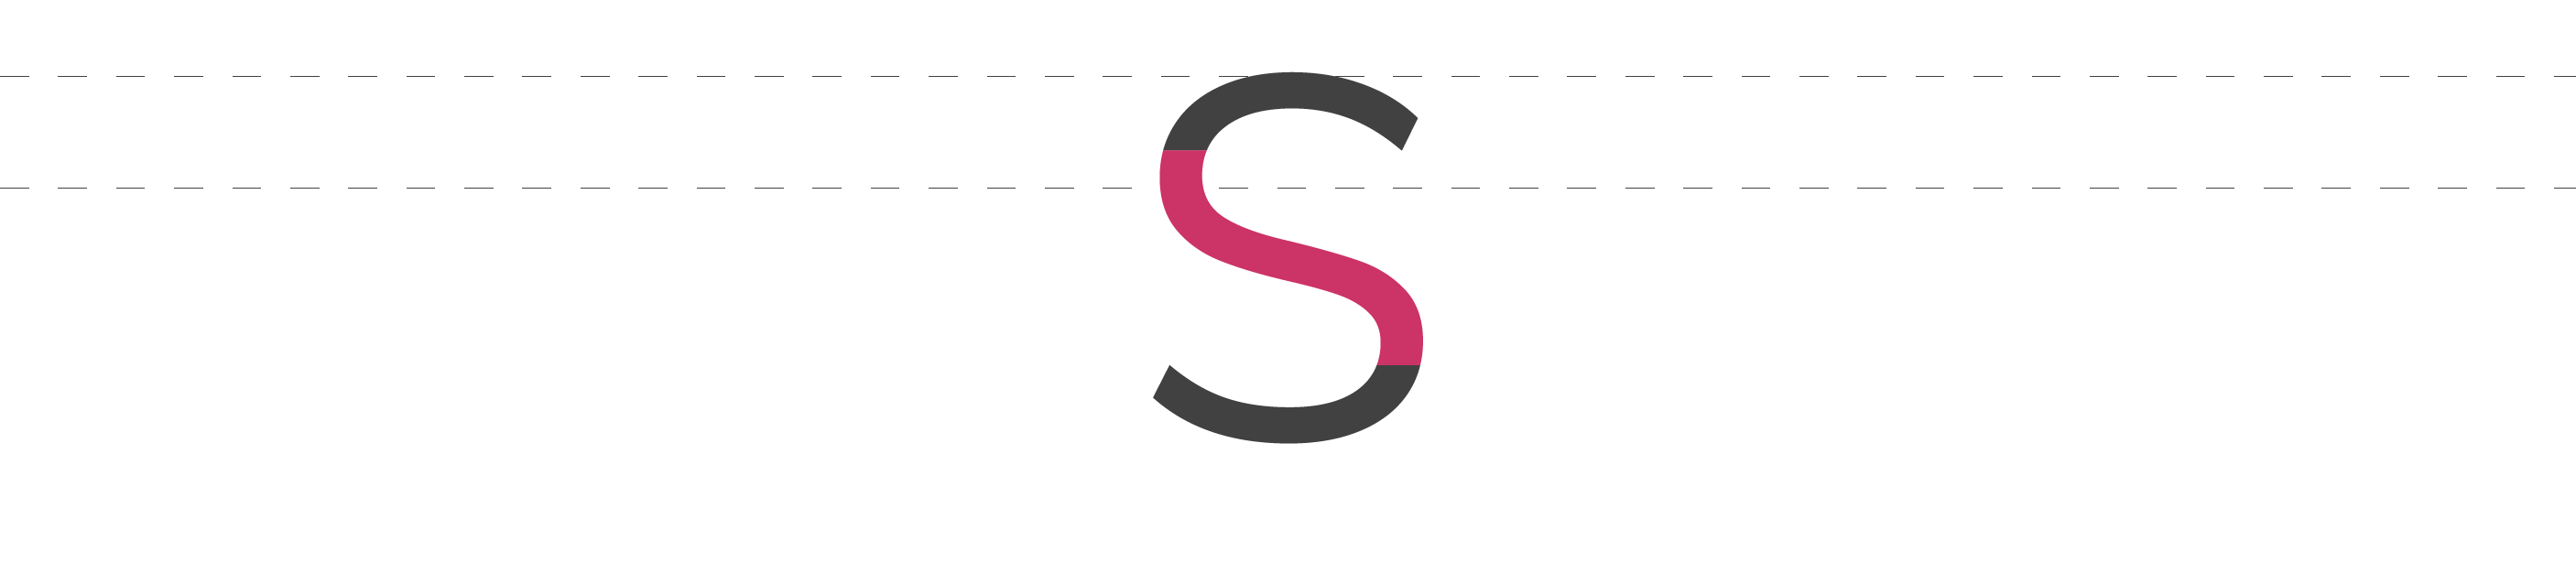 The spine is the stroke that creates the curve in the letter S.